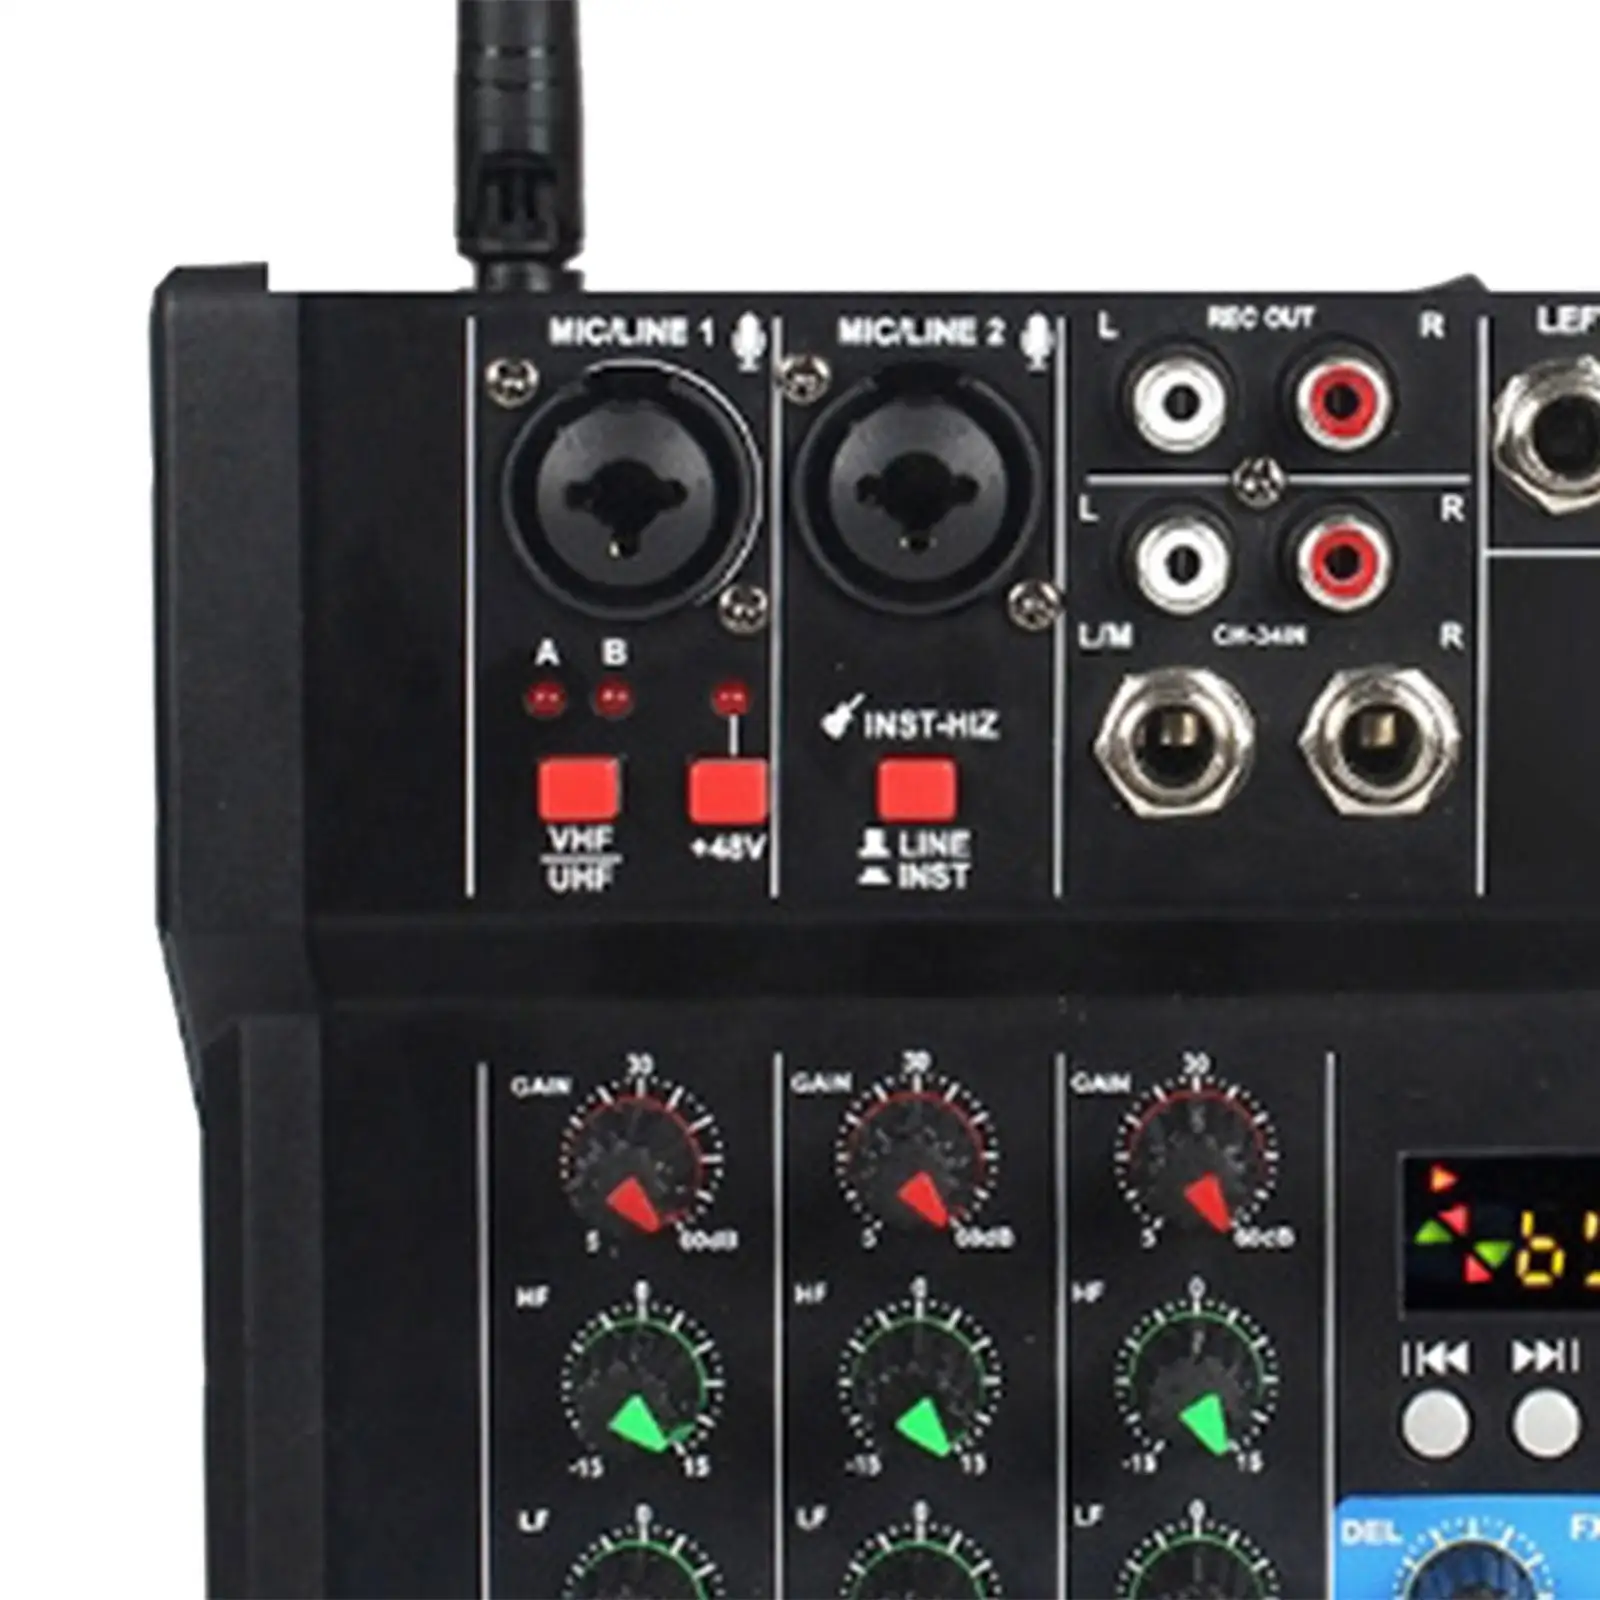 

4 Channel Audio Mixer with 2 Wireless Microphones Sound Board Console System for Computer Recording Karaoke KTV Party UK Adapter